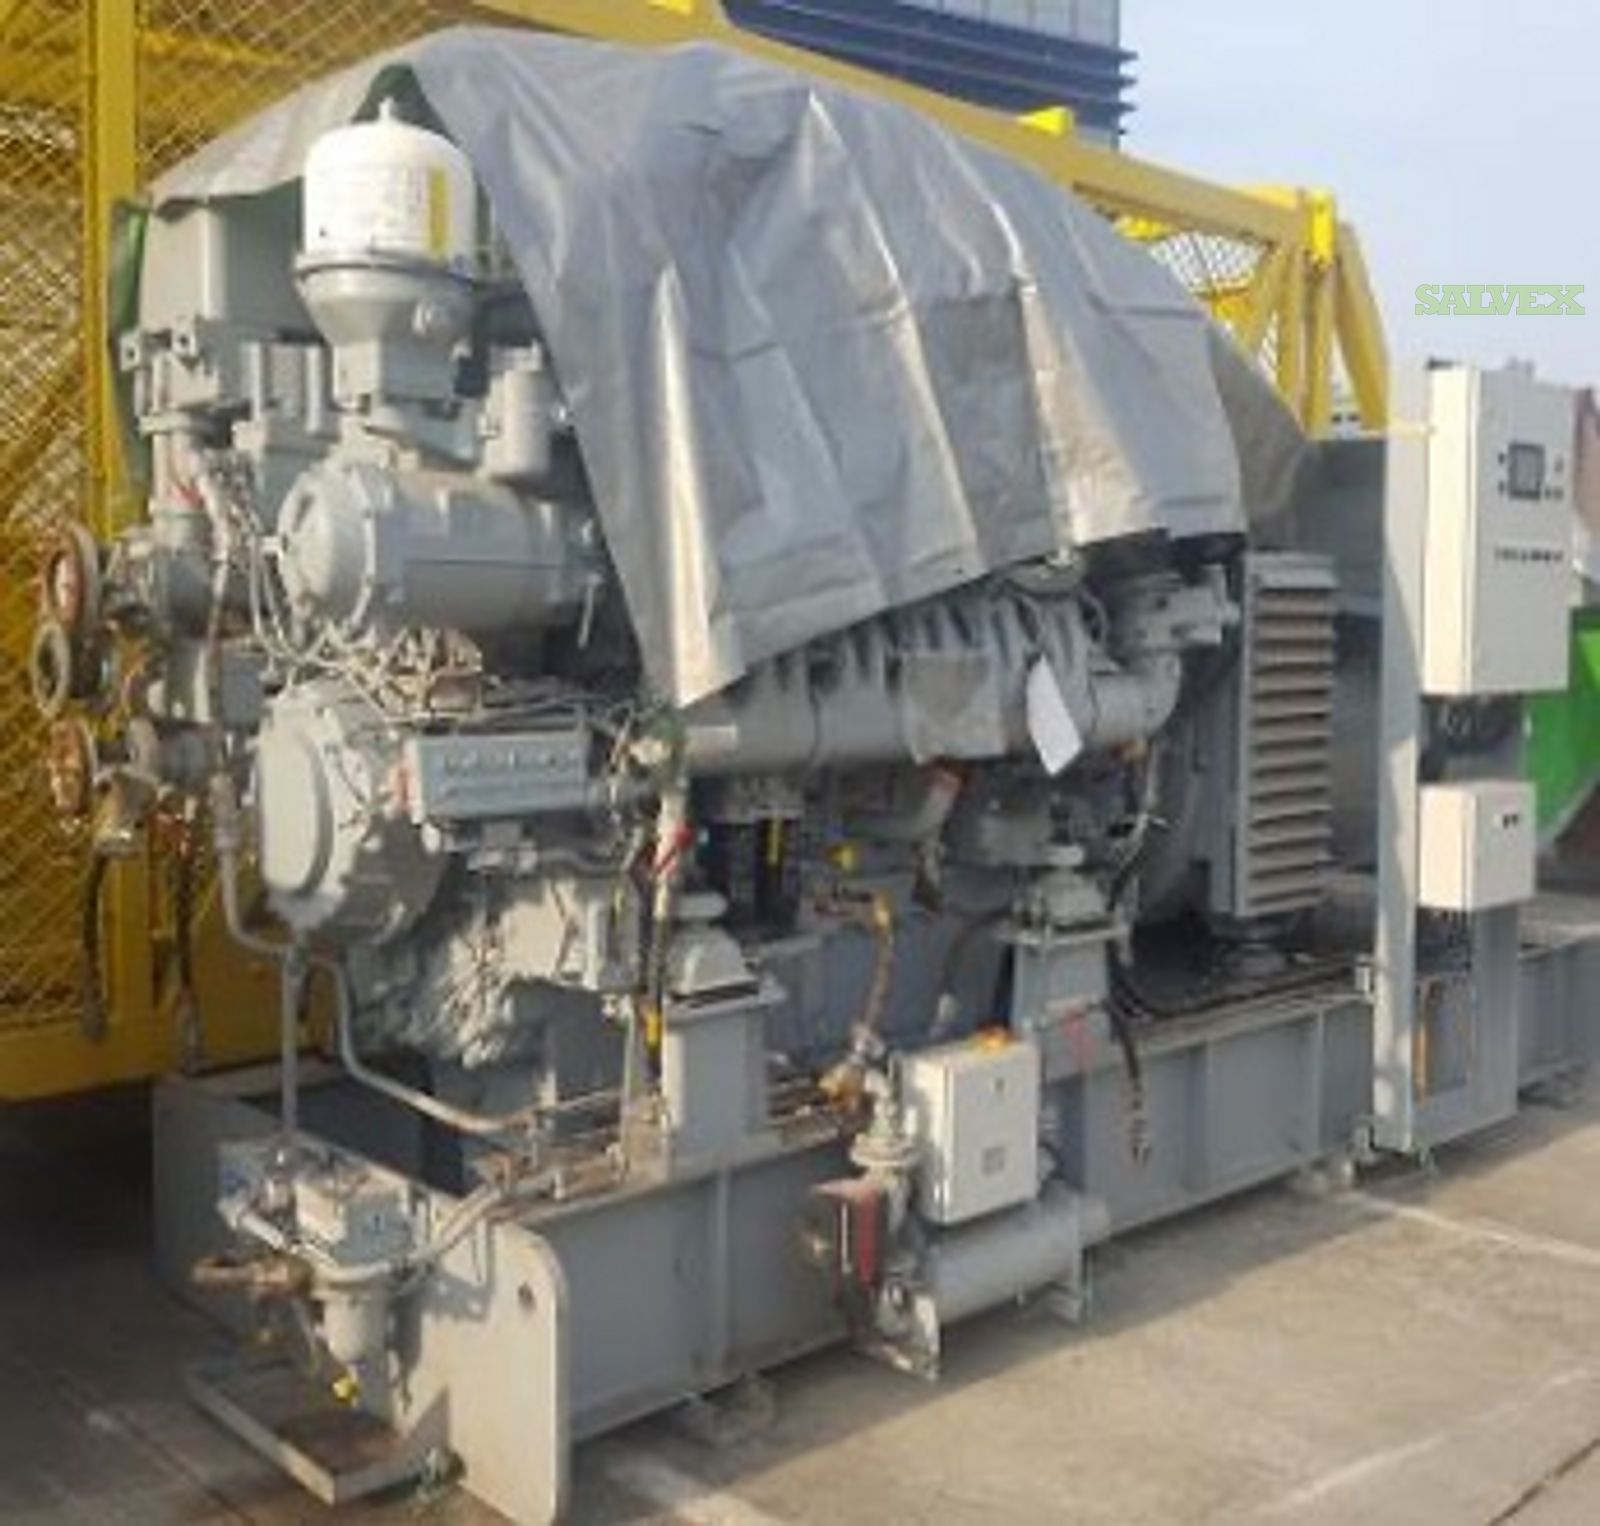 MTU 12V 4000 P83 Emergency Diesel Genset with GEA Heat Exchanger and Complete Accessories (1 Unit with Accessories)